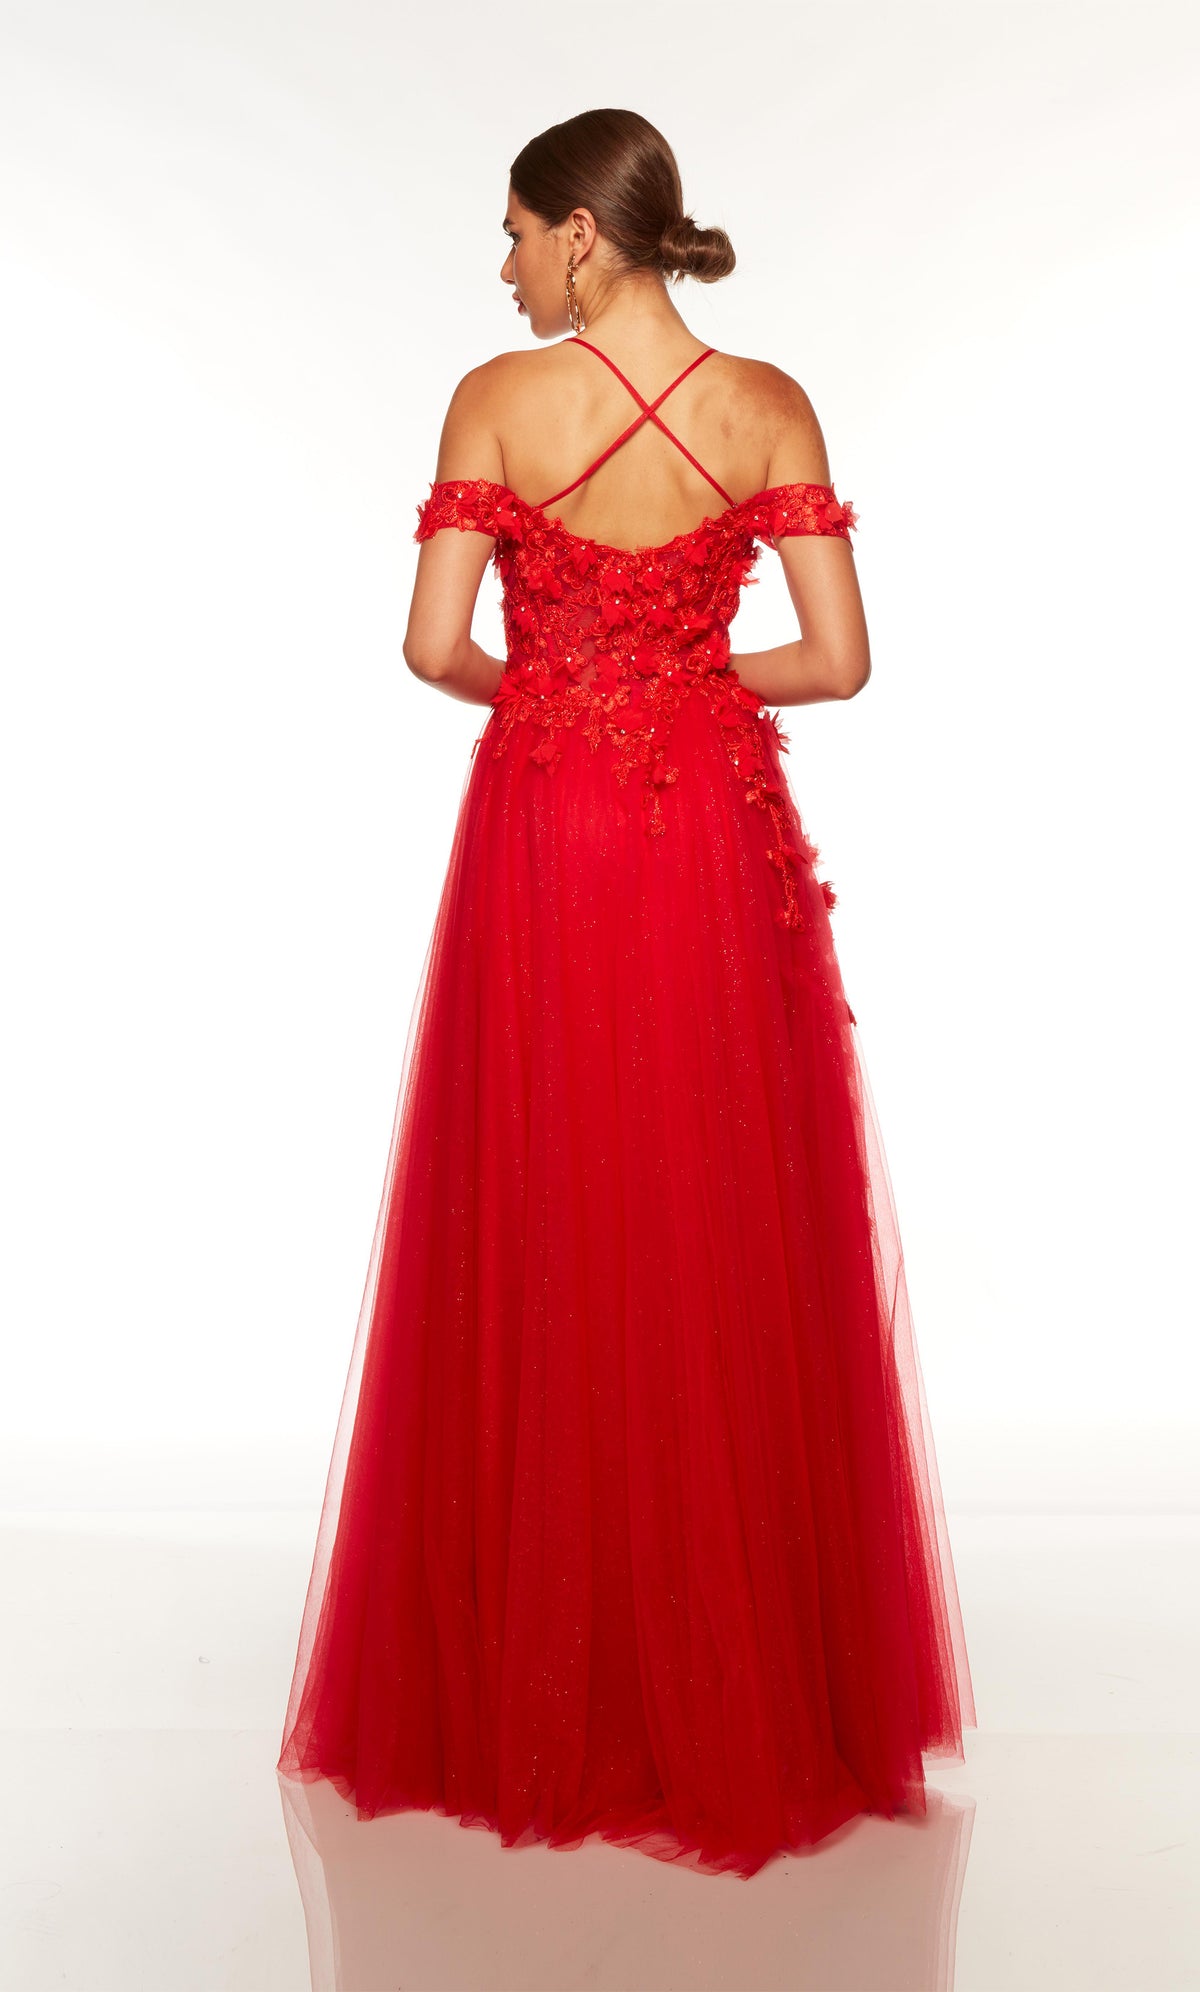 Sexy red prom dress with a crisscross strappy back and 3d flowers.